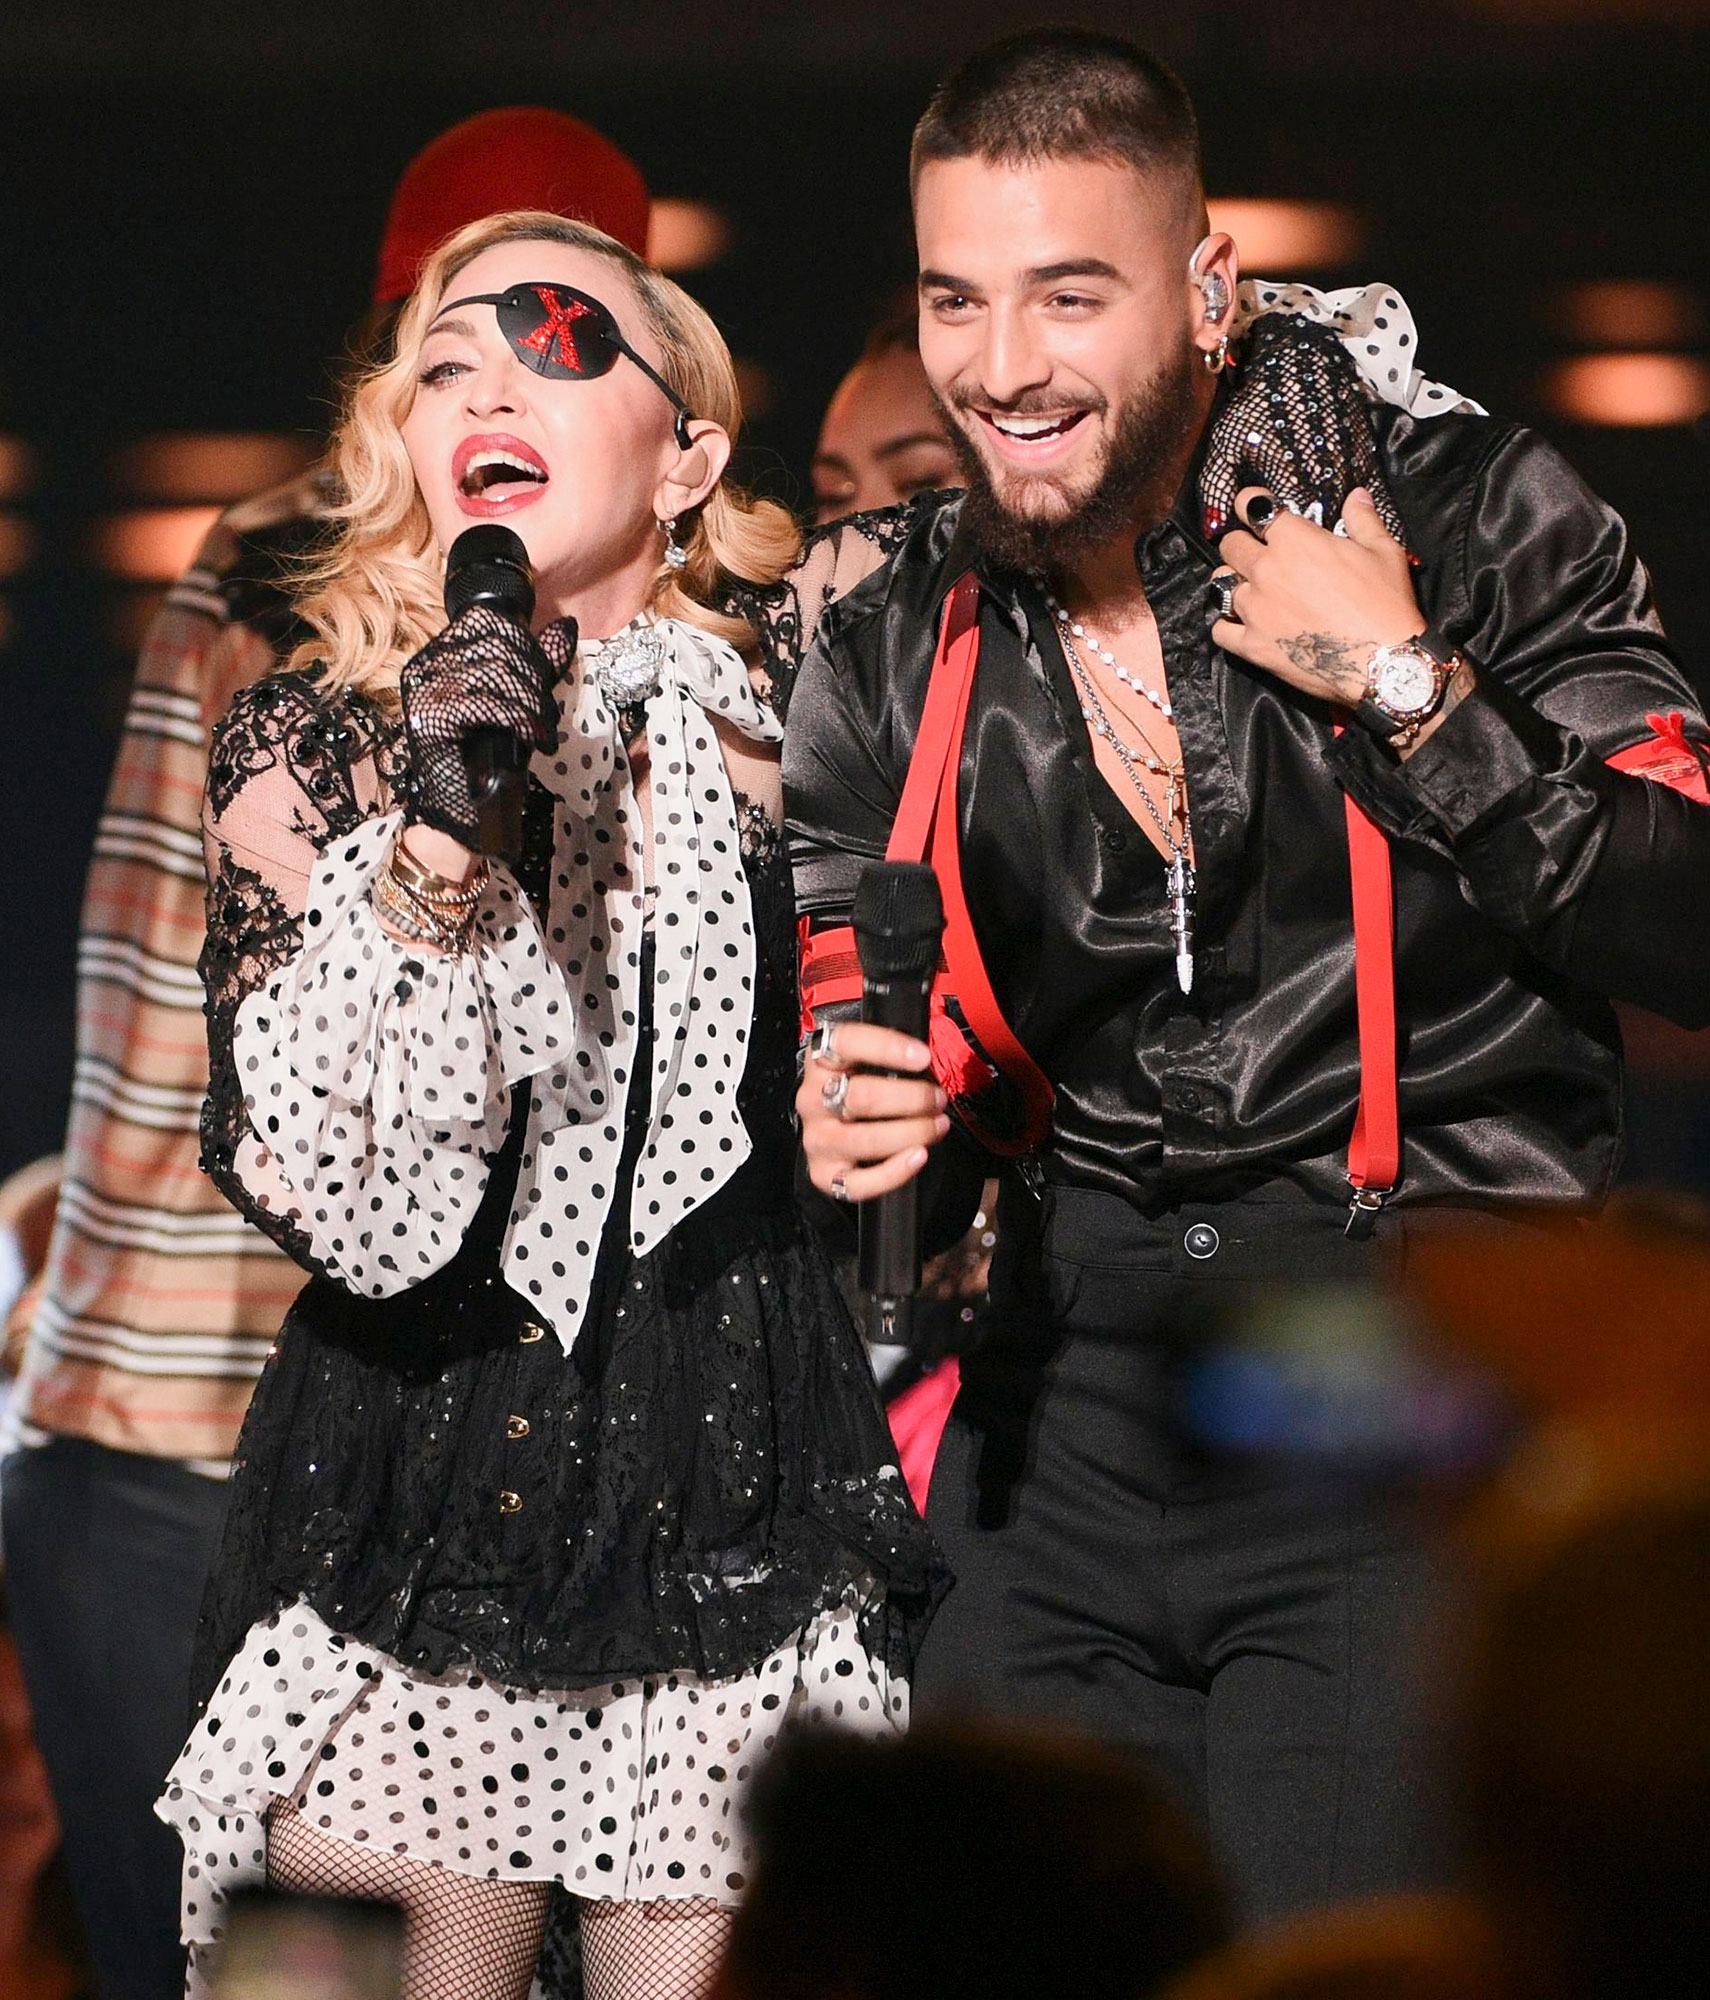 20190502-pictures-madonna-bbma-performance-20.jpg